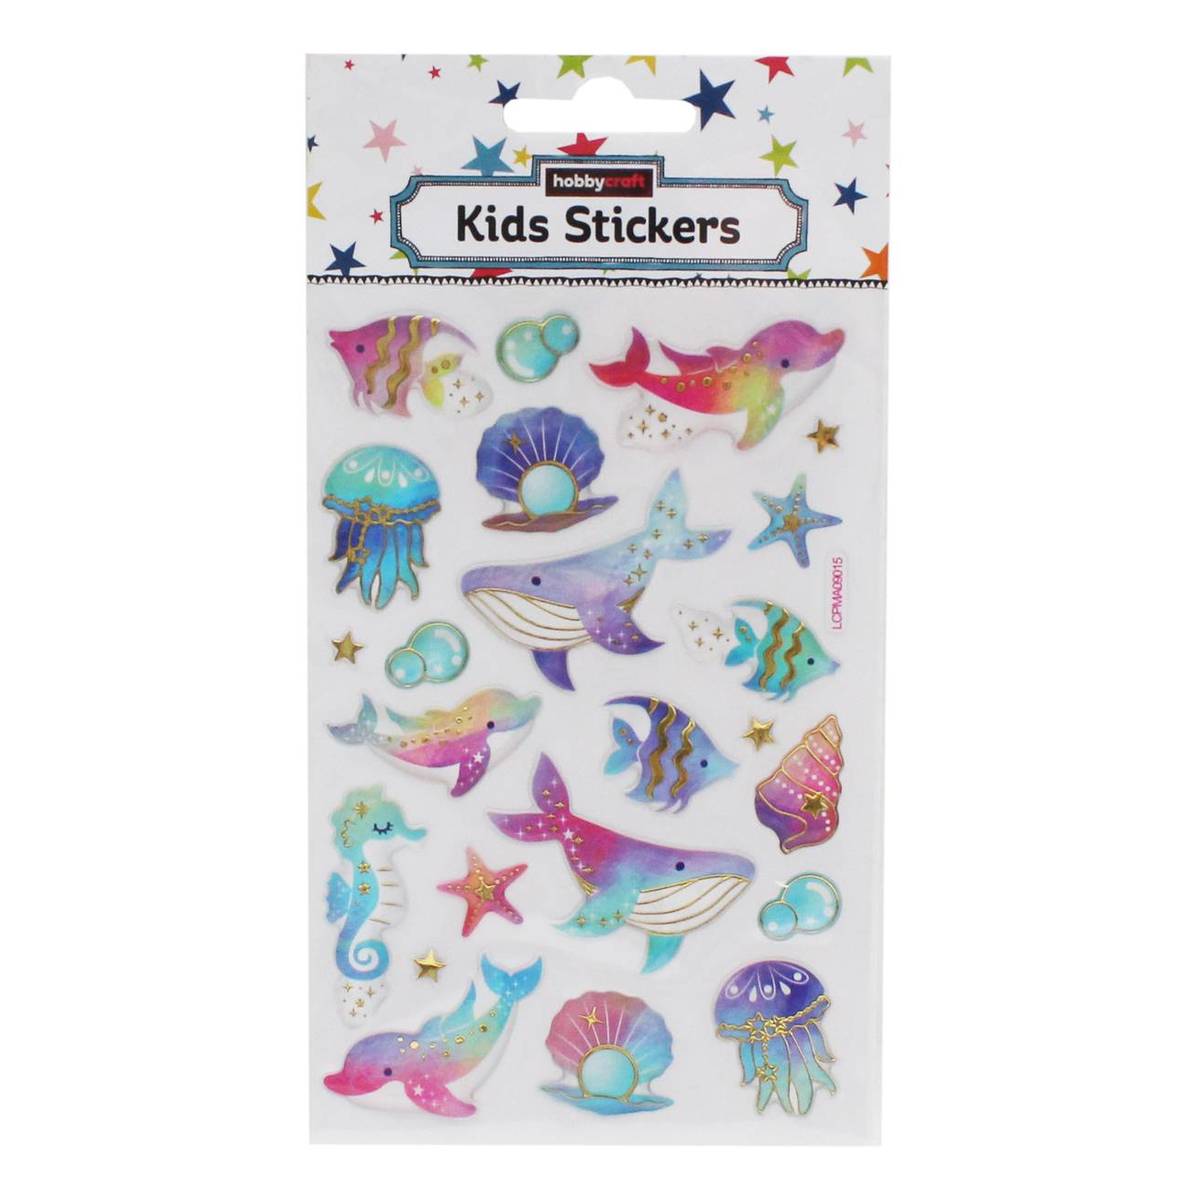 New SeaLife Puffy Stickers *Craft Projects*School Projects* X 3 Sheets 